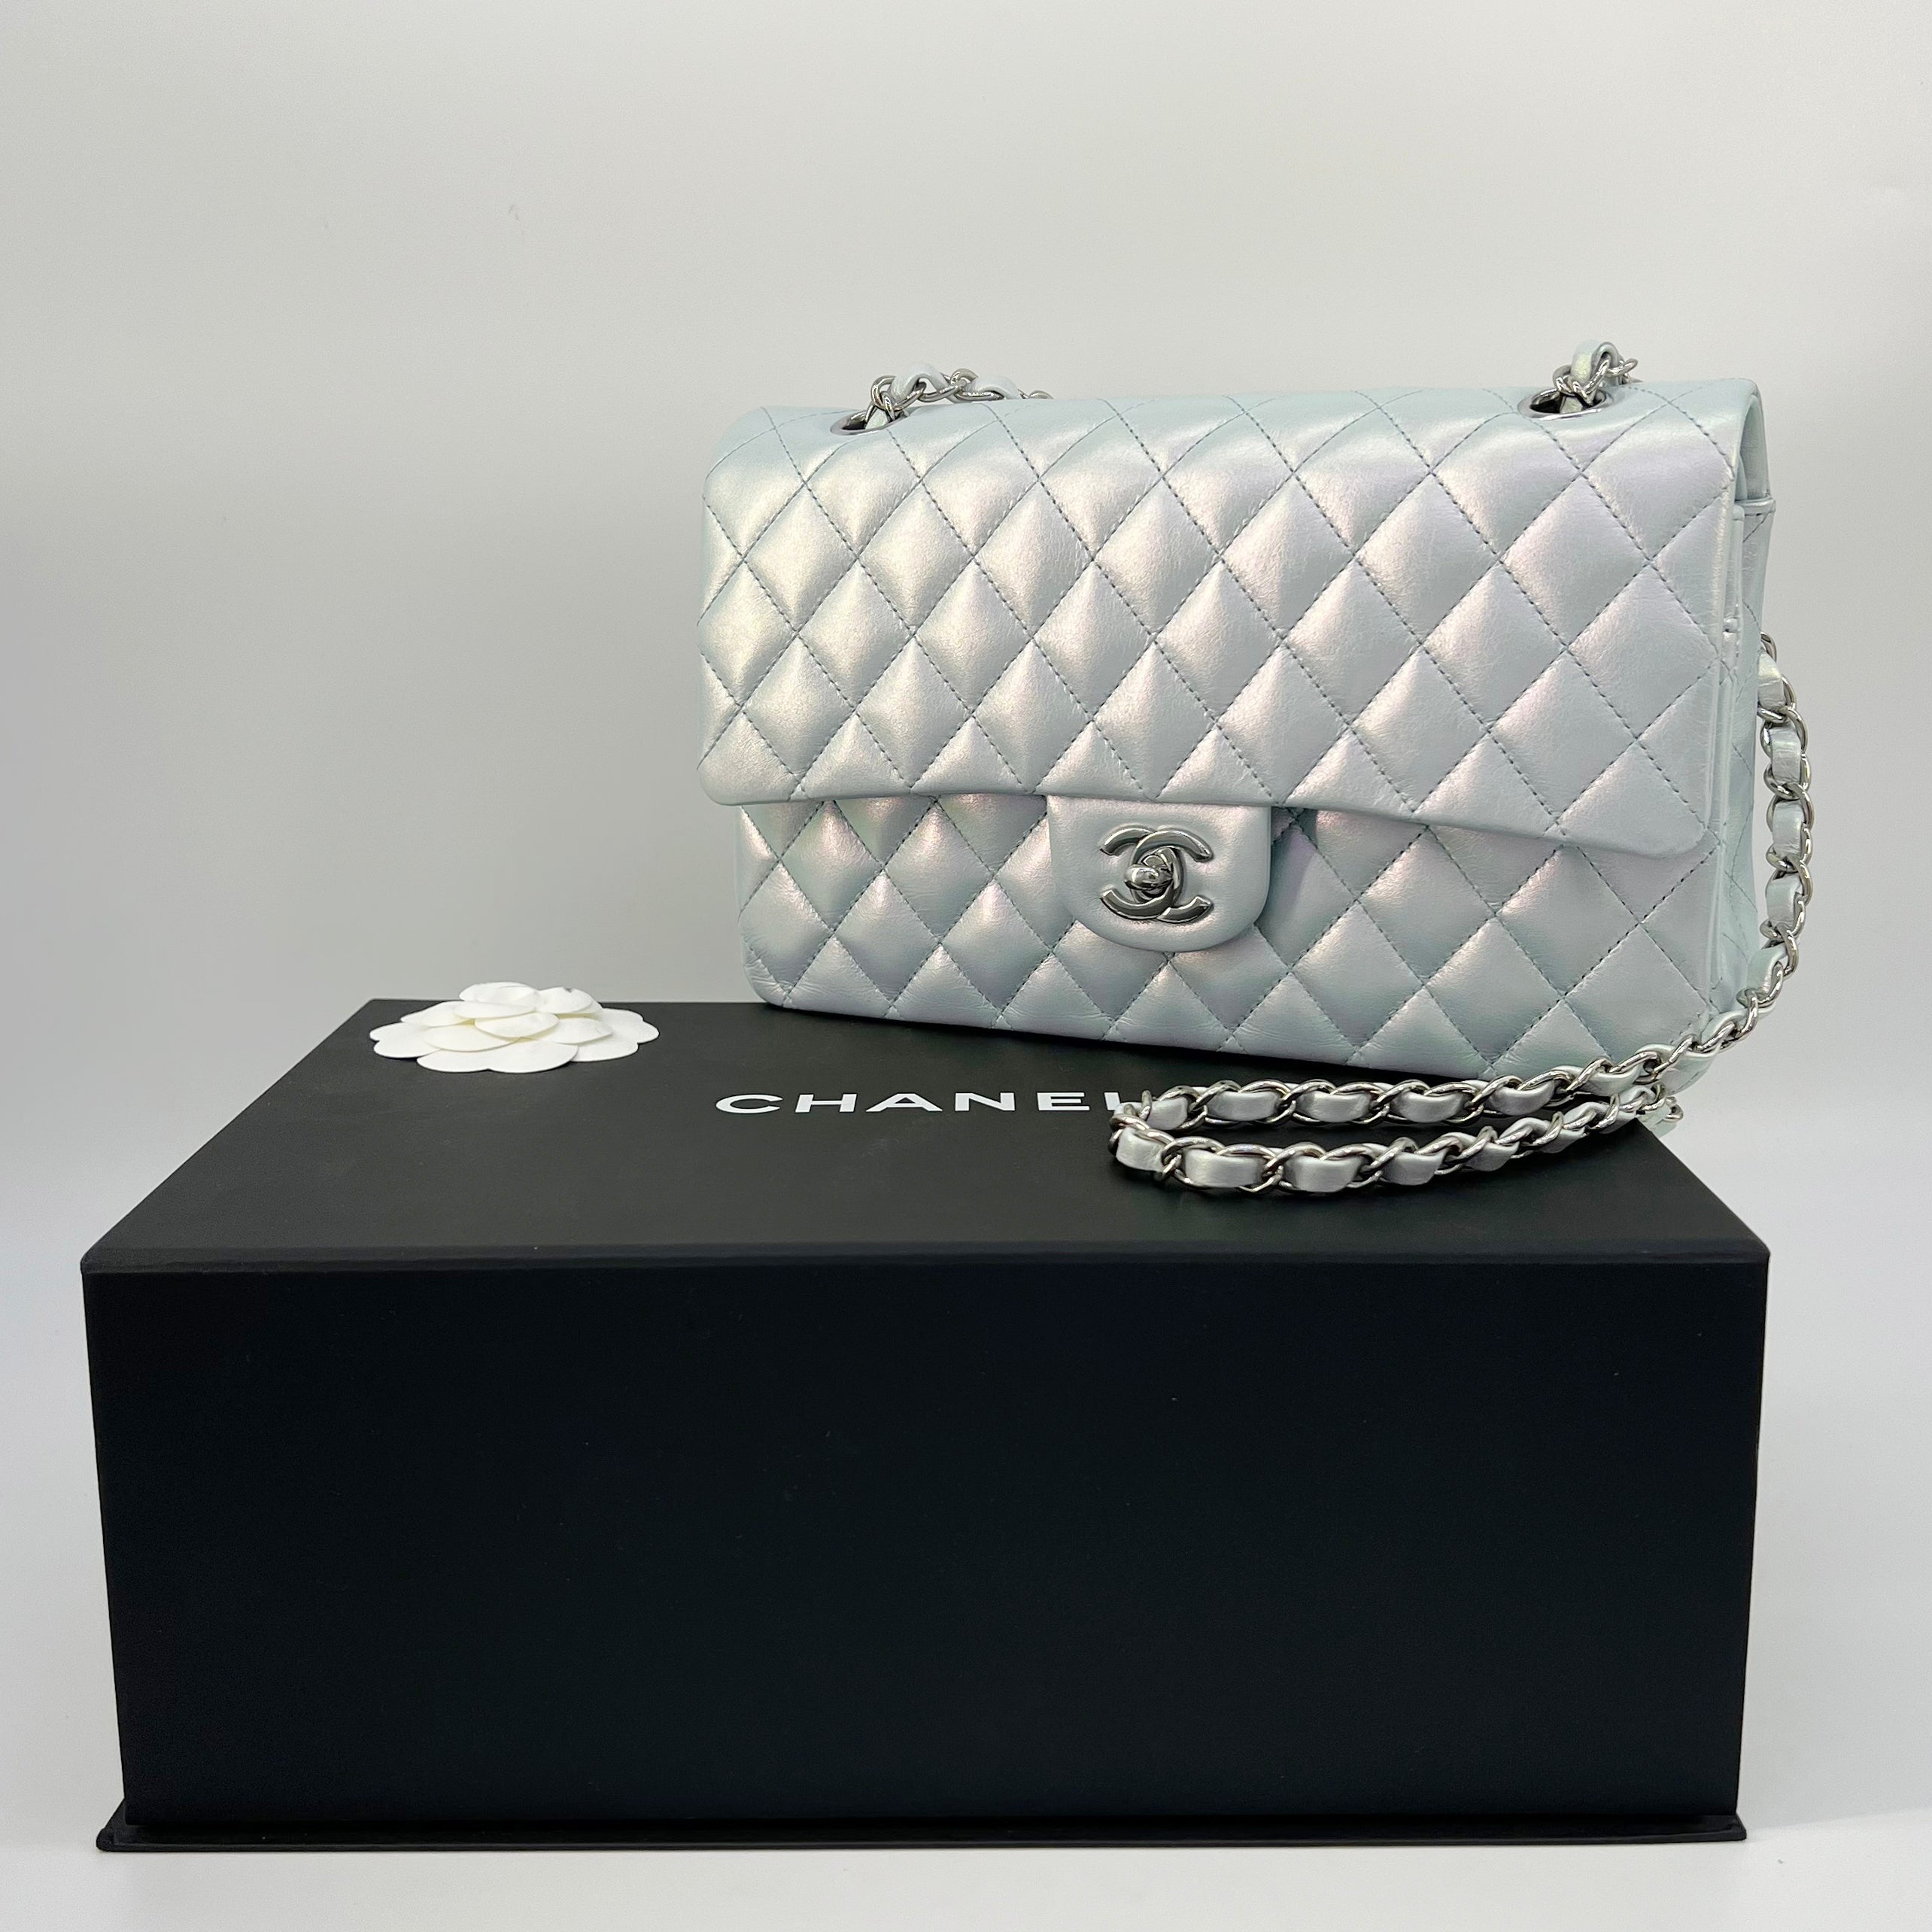 Guaranteed Authentic Chanel Double Flap Classic Timeless 10" light Blue Iridescent Lambskin Shoulder Bag